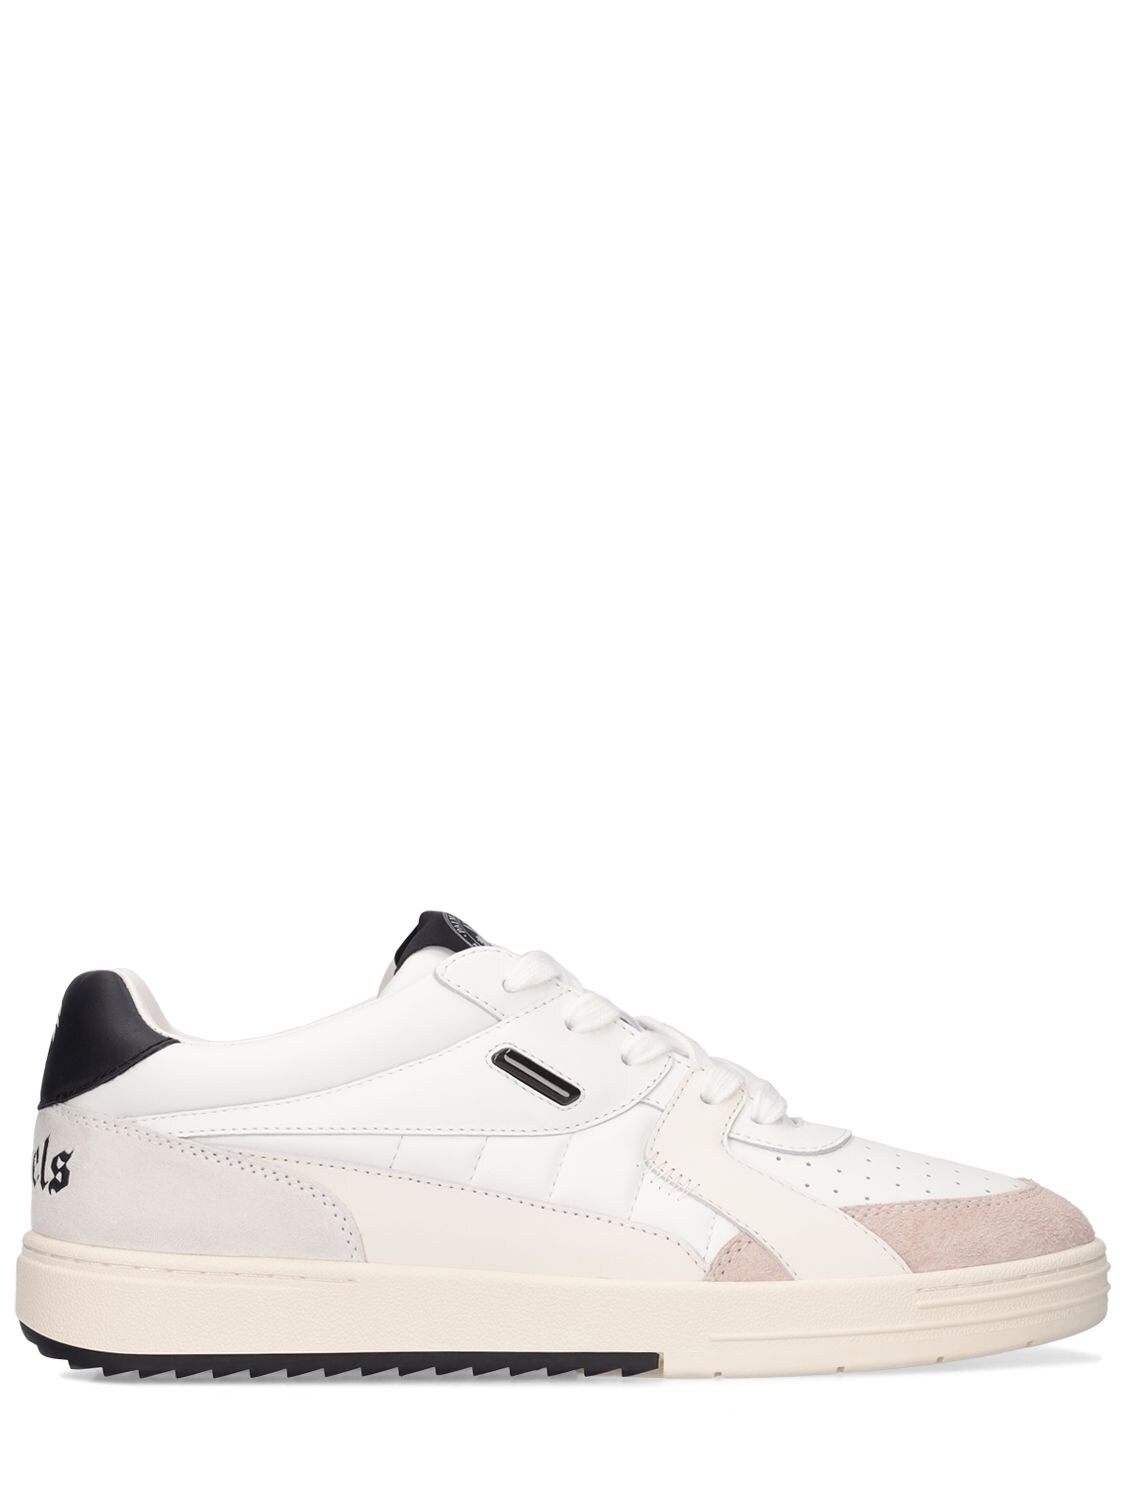 PALM ANGELS Palm University Leather Low-top Sneakers